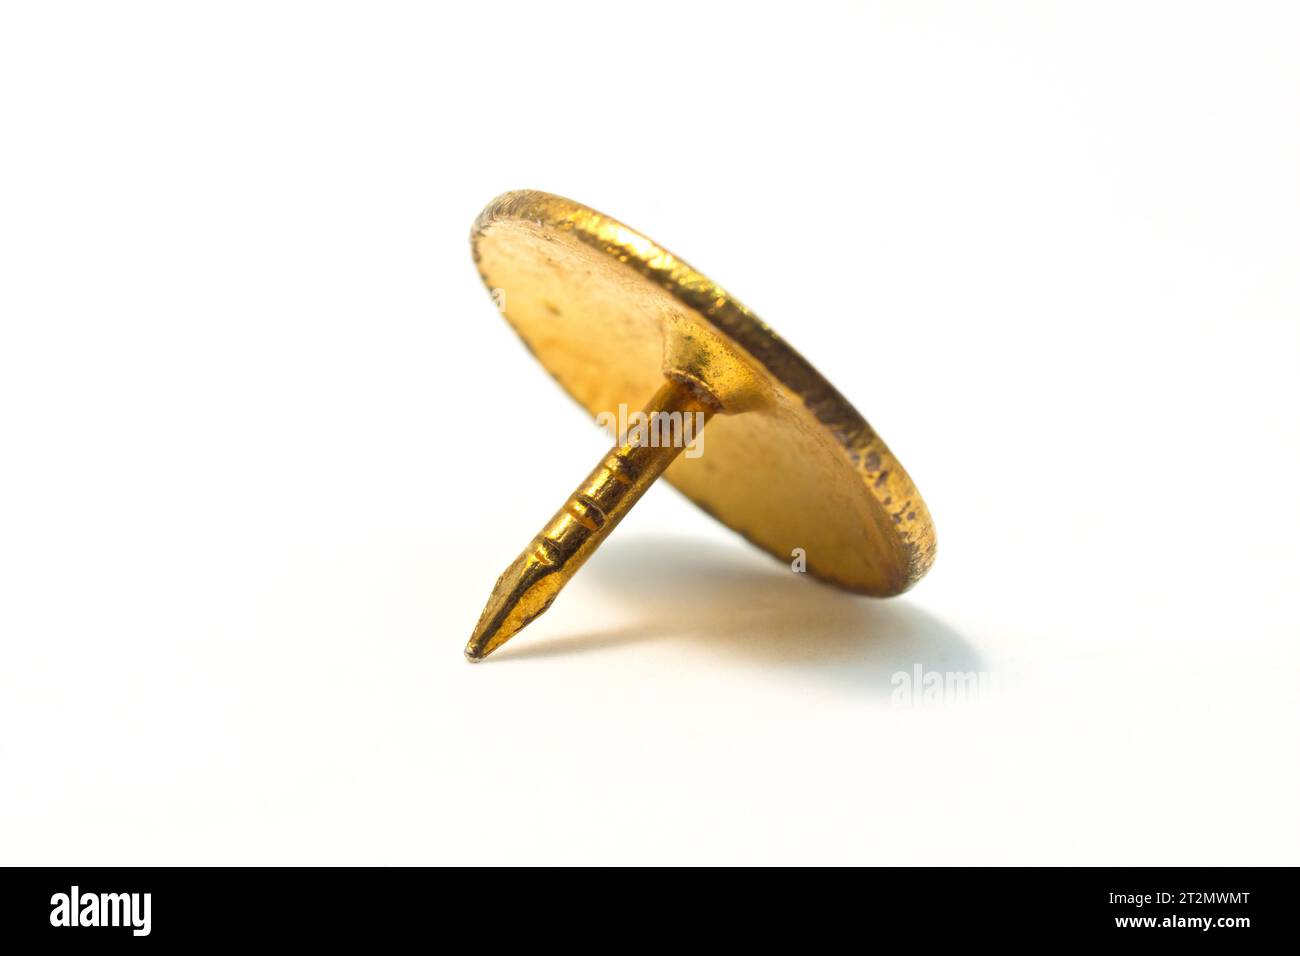 Close up of a single brass drawing pin, push pin or thumb tack, isolated against a white background. Stock Photo